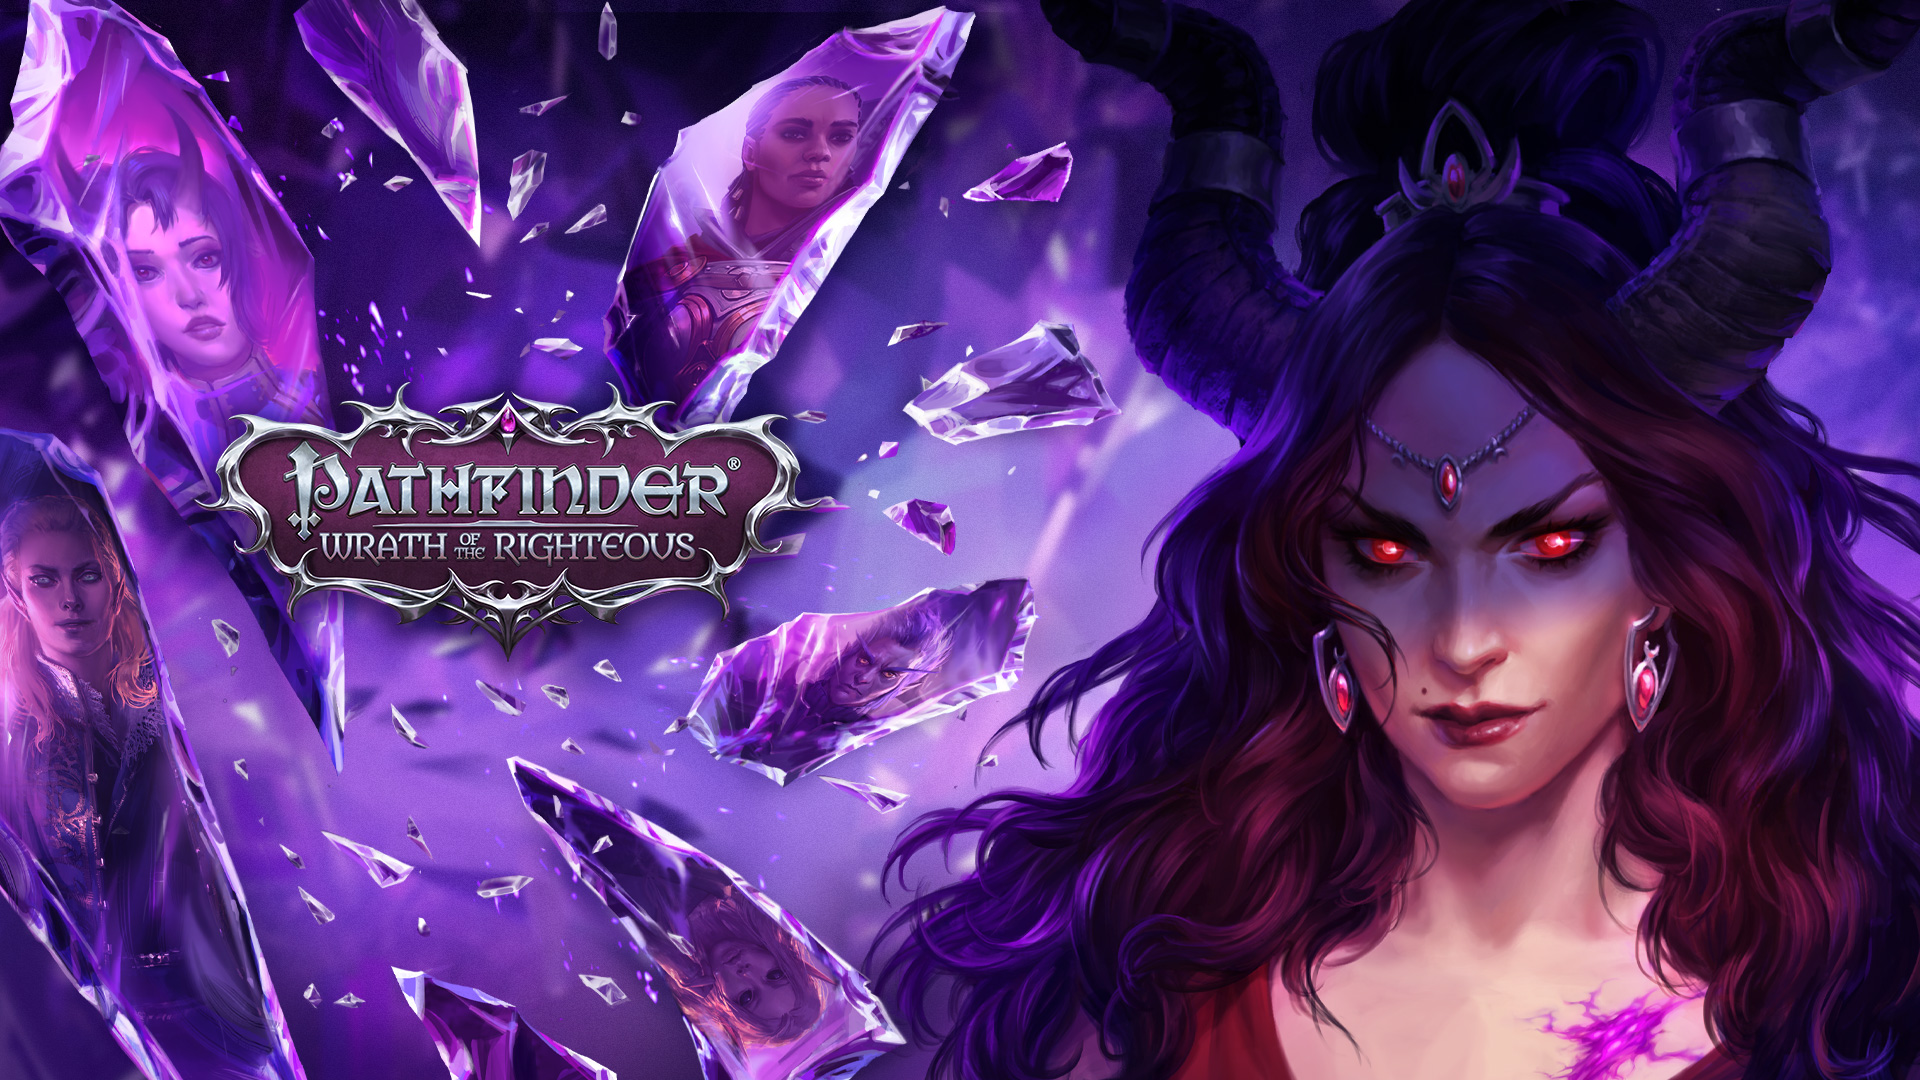 Video For Critically-Acclaimed CRPG Pathfinder: Wrath of the Righteous Comes to Xbox Today